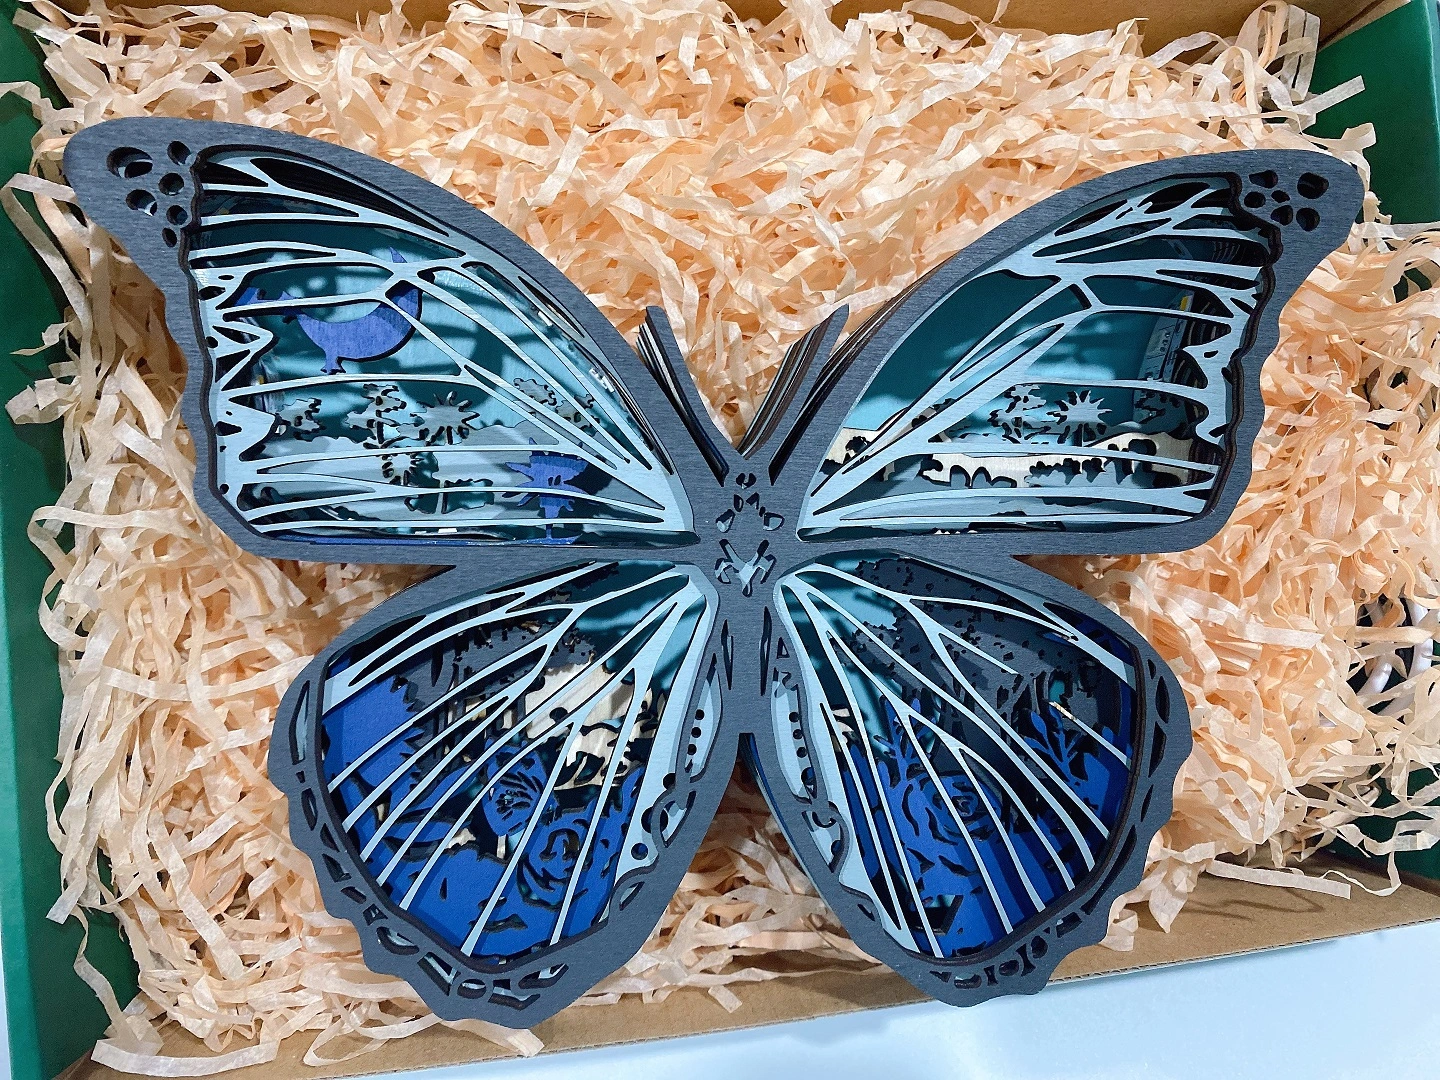 Blue Morpho 3D Wooden Carving,Suitable for Home Decoration,Holiday Gift,Art Night Light